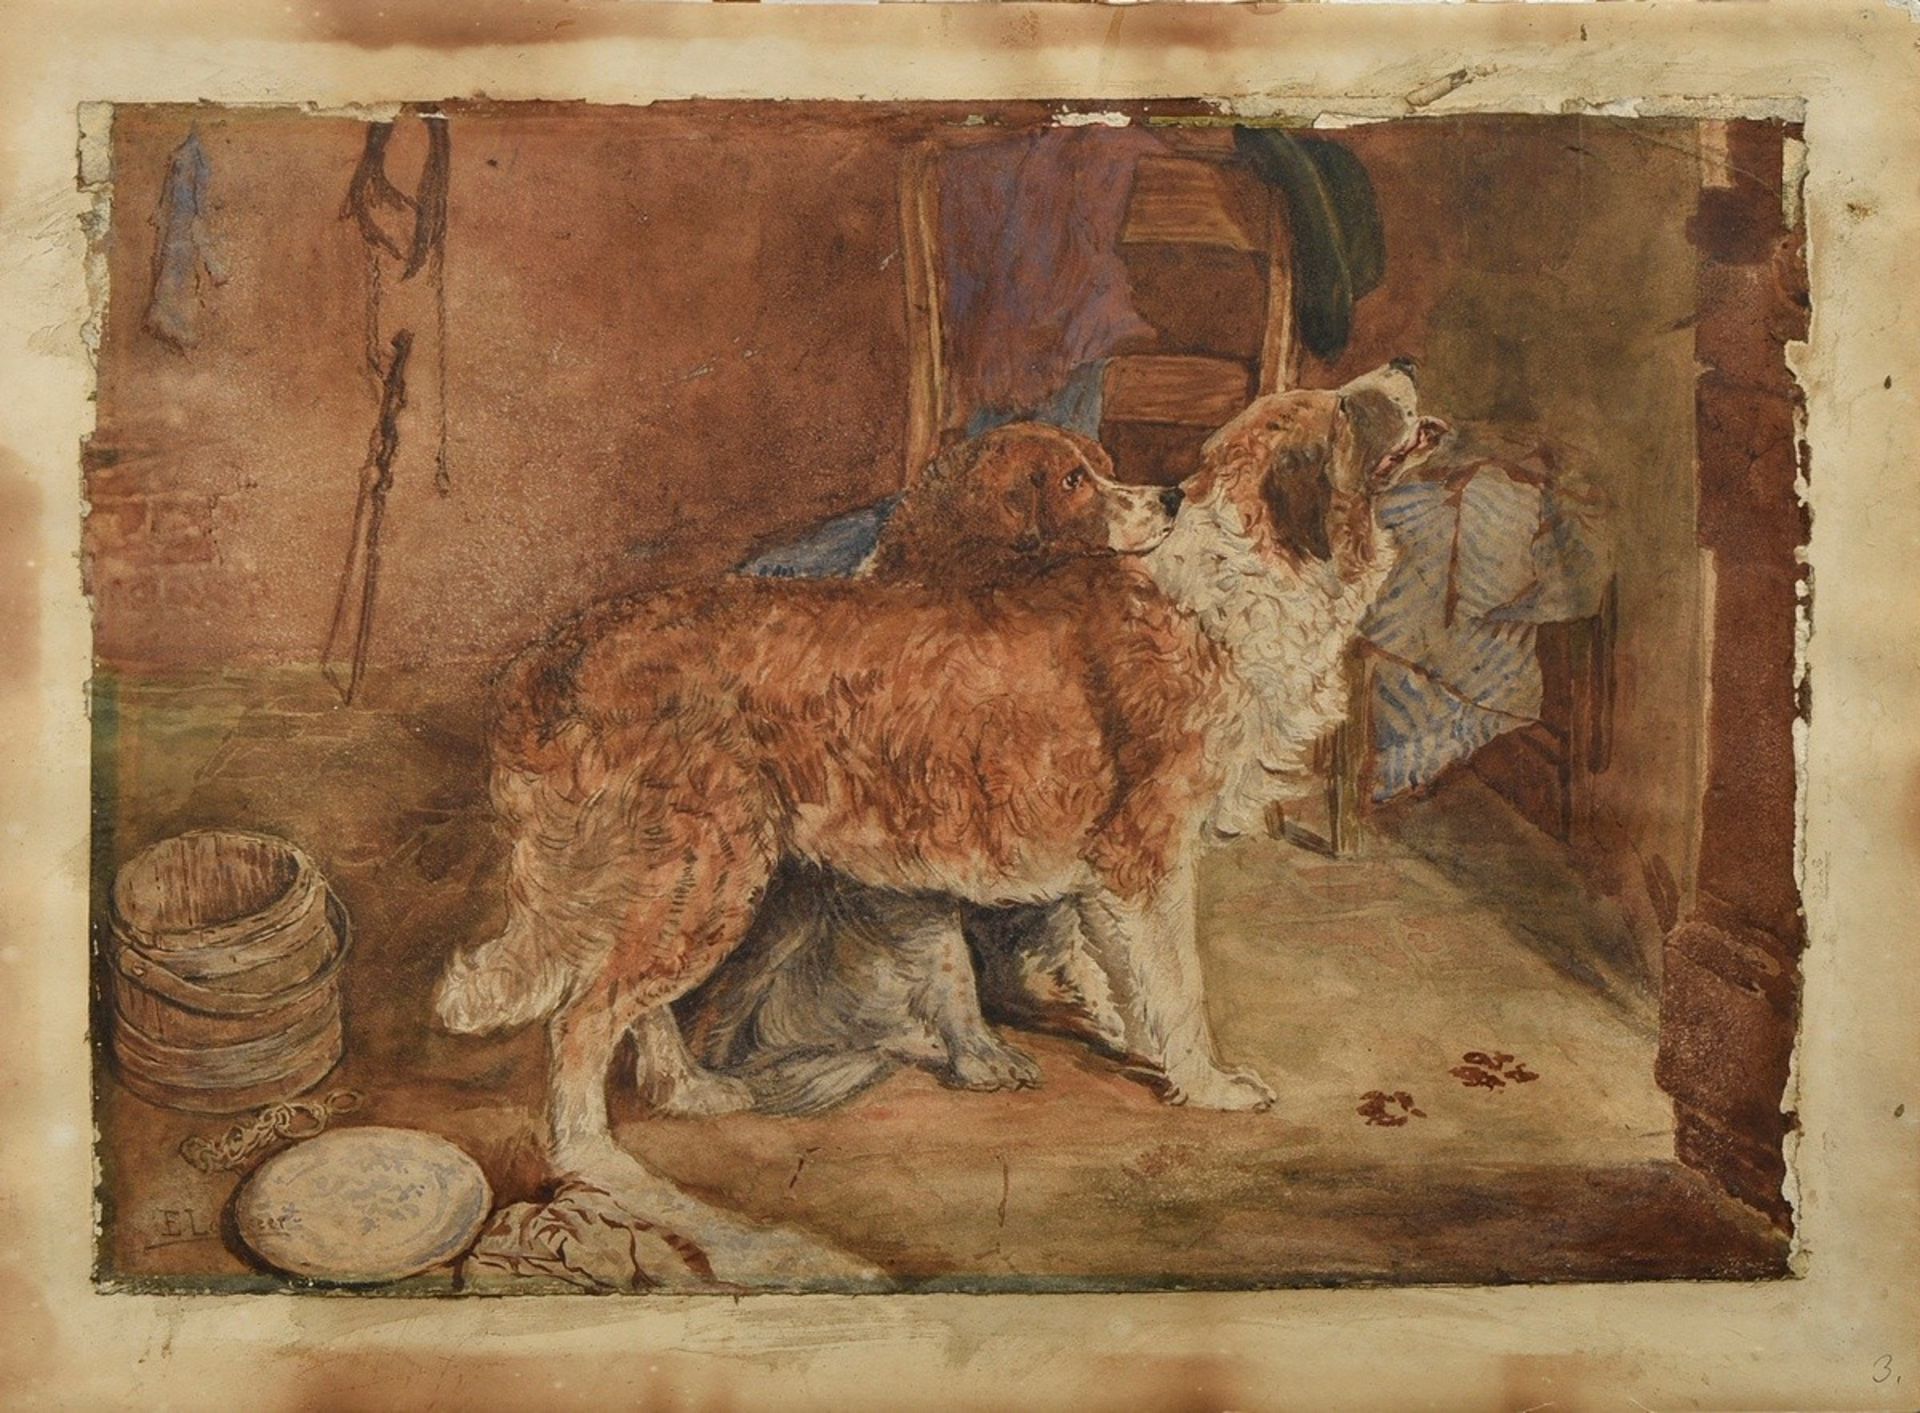 Unknown artist of the 19th c. "Two Newfoundlanders" after Edwin Henry Landseer (1802-1873), waterco - Image 2 of 3